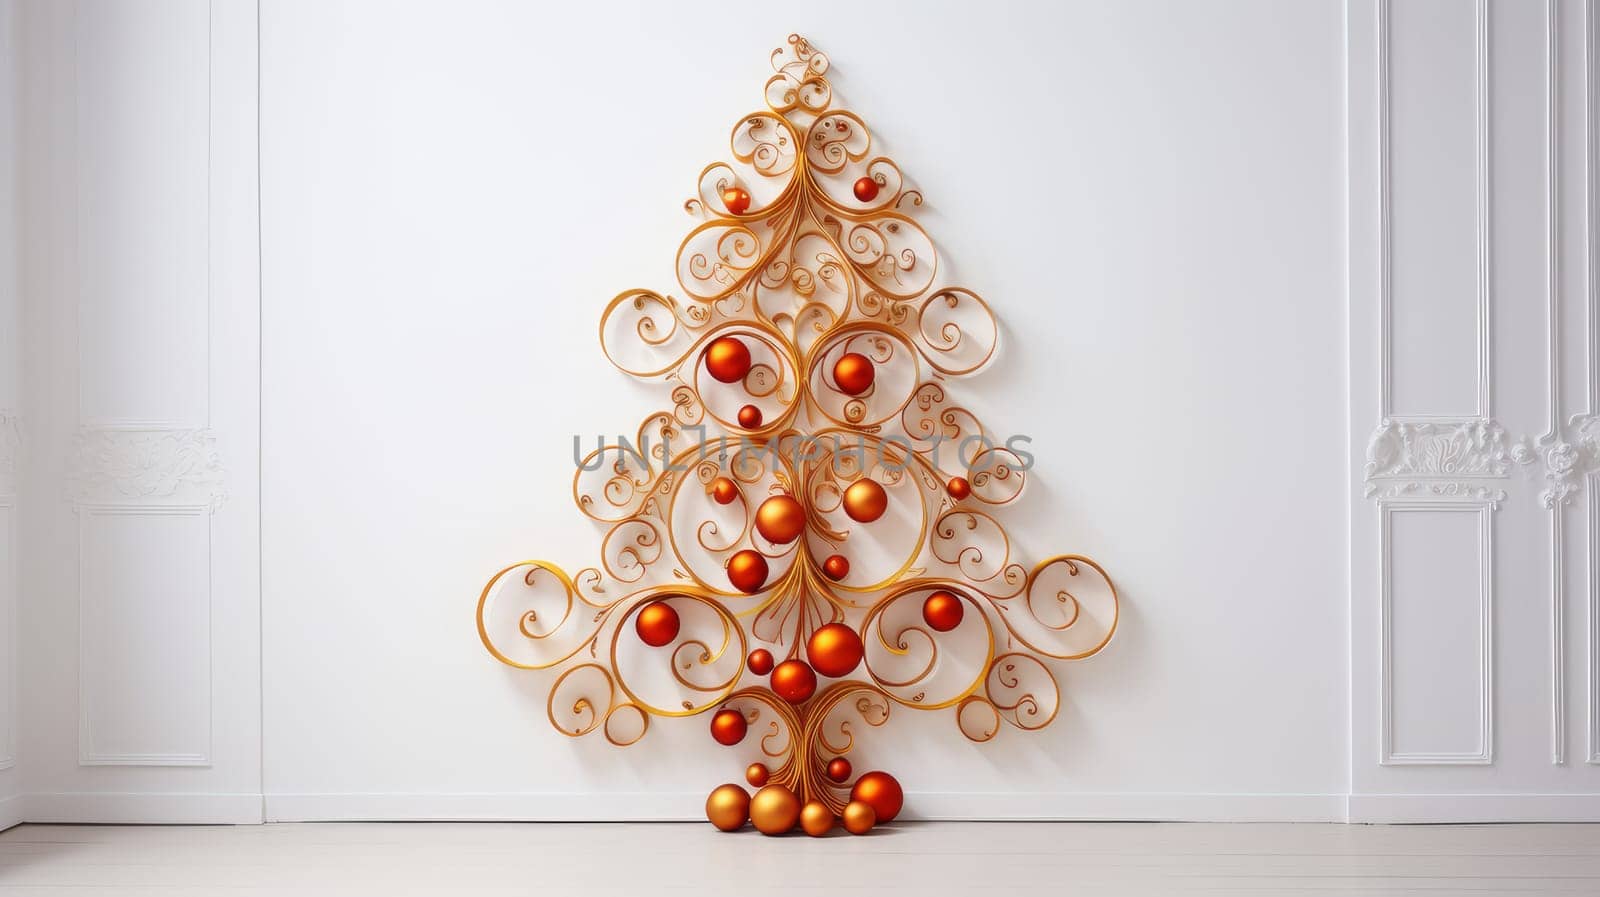 Creative and modern Christmas tree in Art Nouveau style against a white wall. Merry Christmas and Happy New Year concept